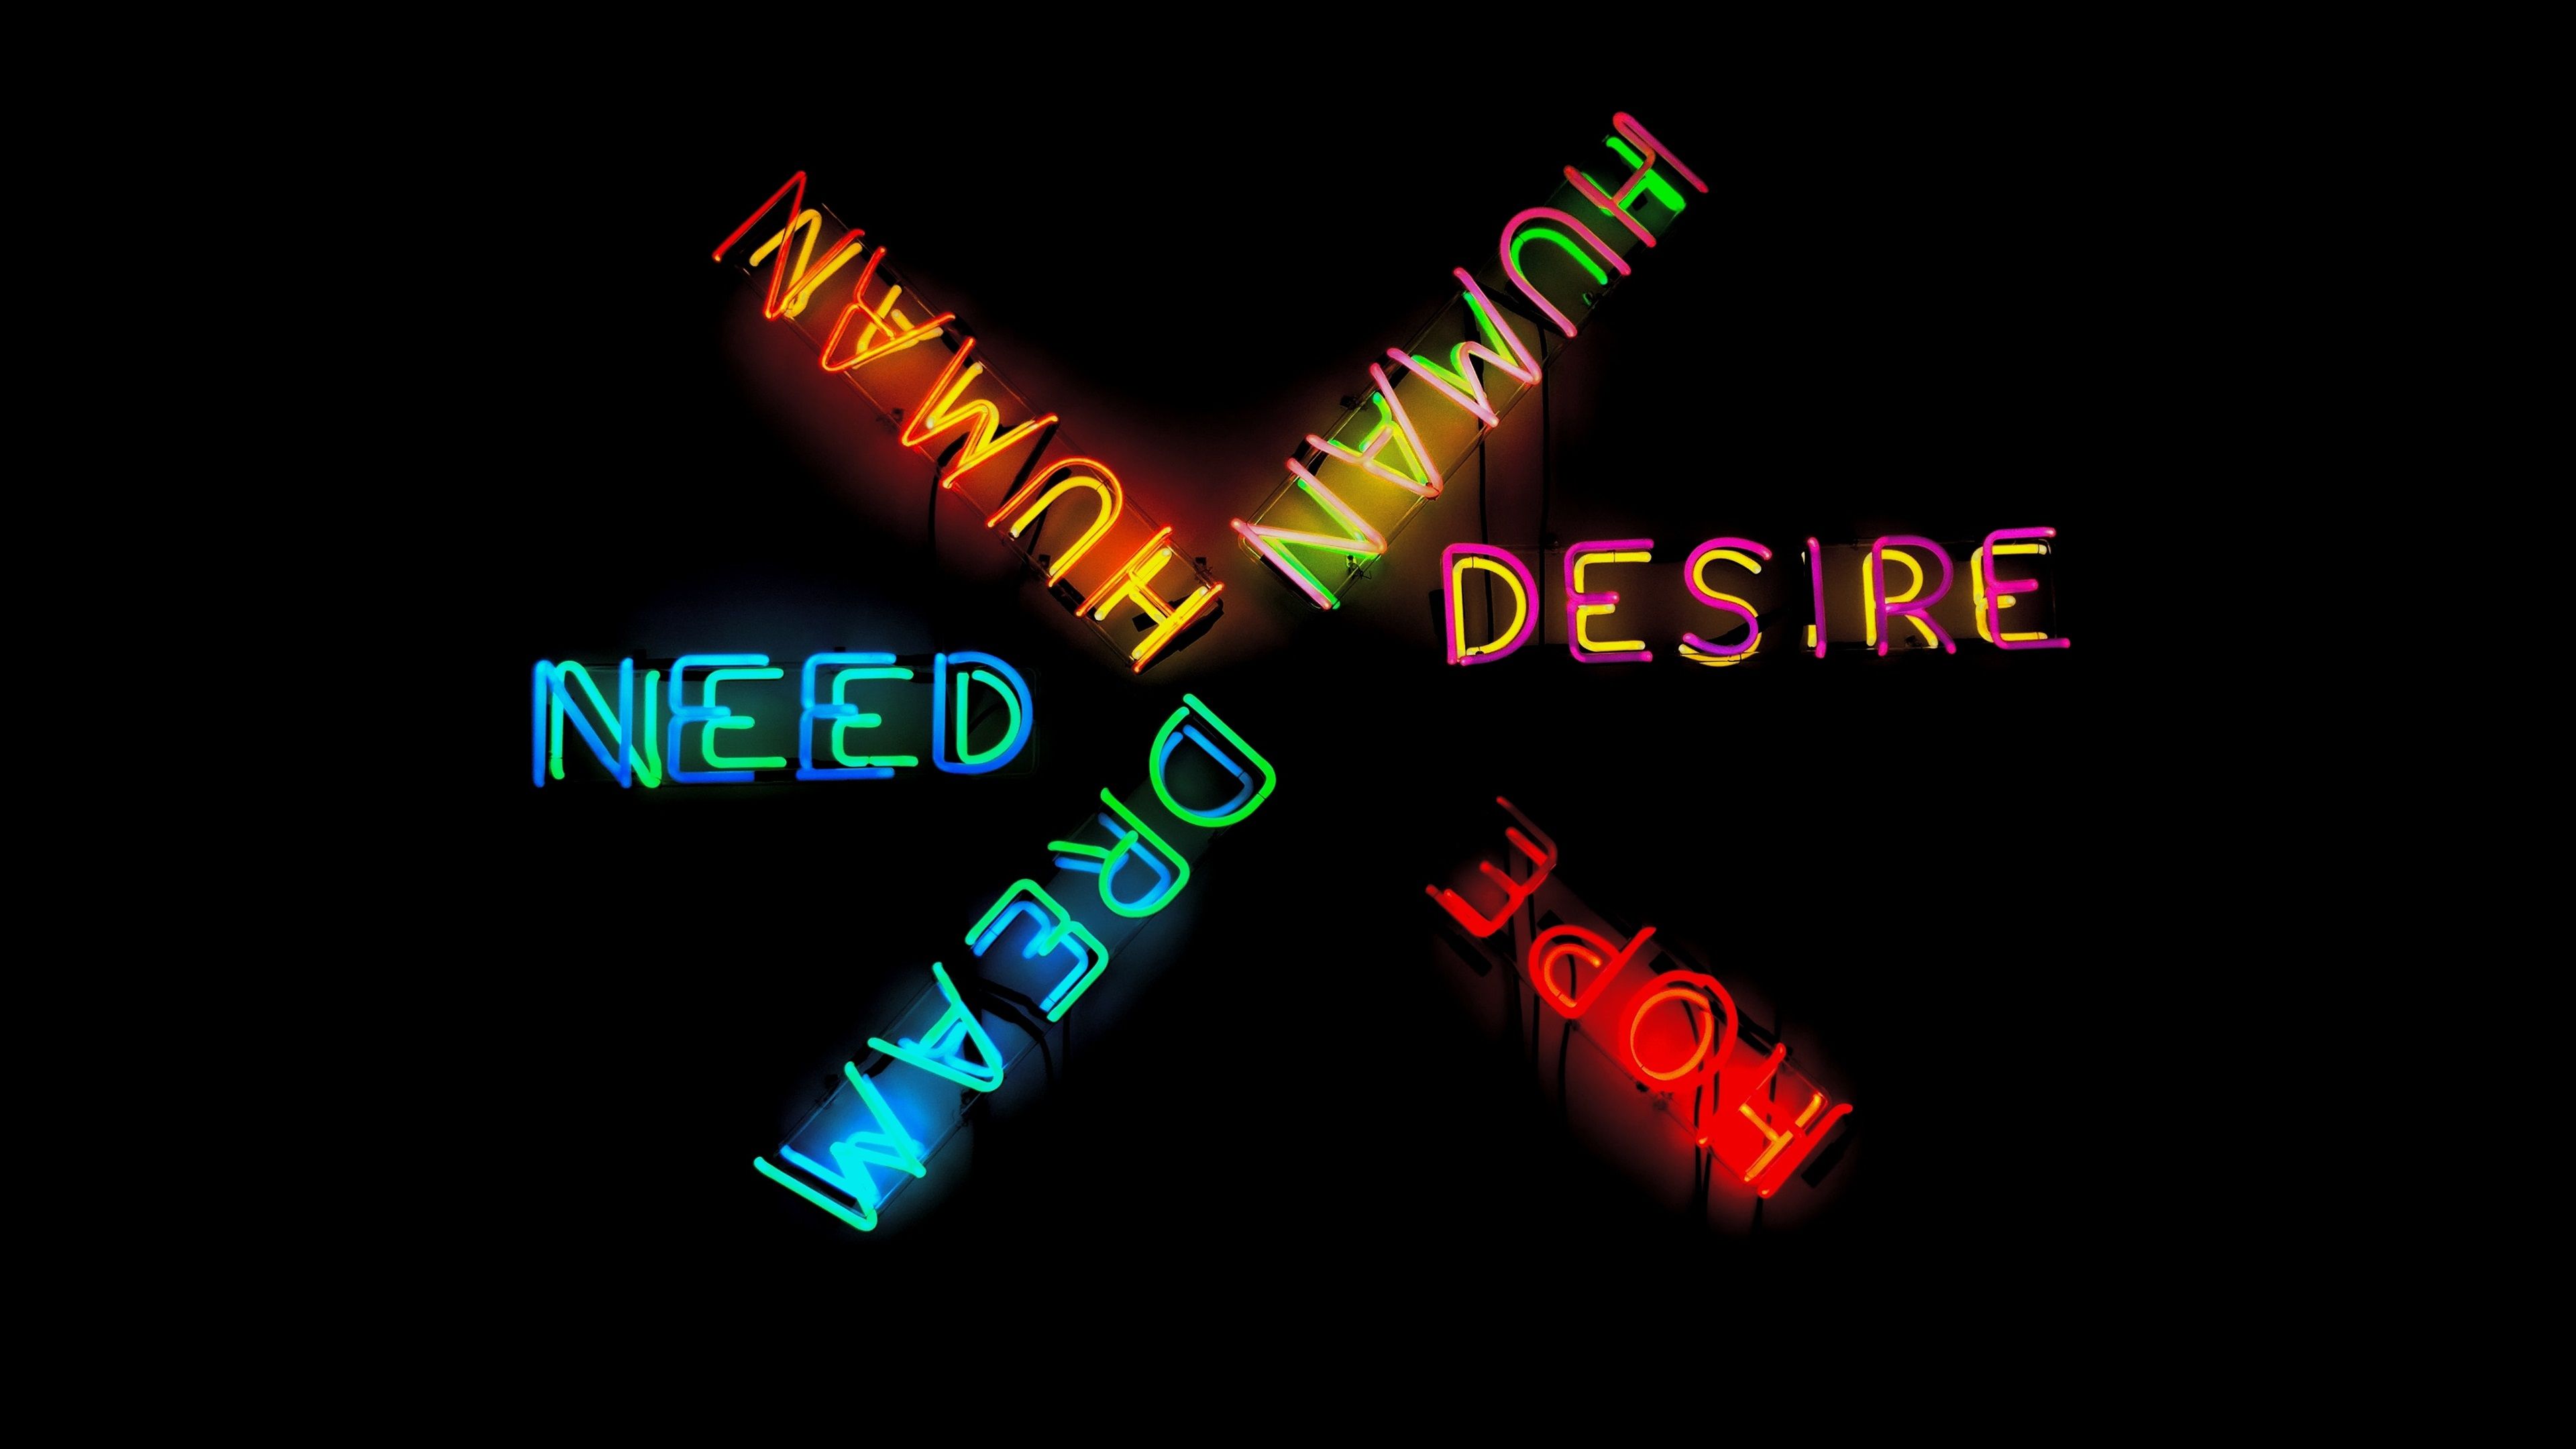 Wallpaper Colorful neon words, darkness 3840x2160 UHD 4K Picture, Image